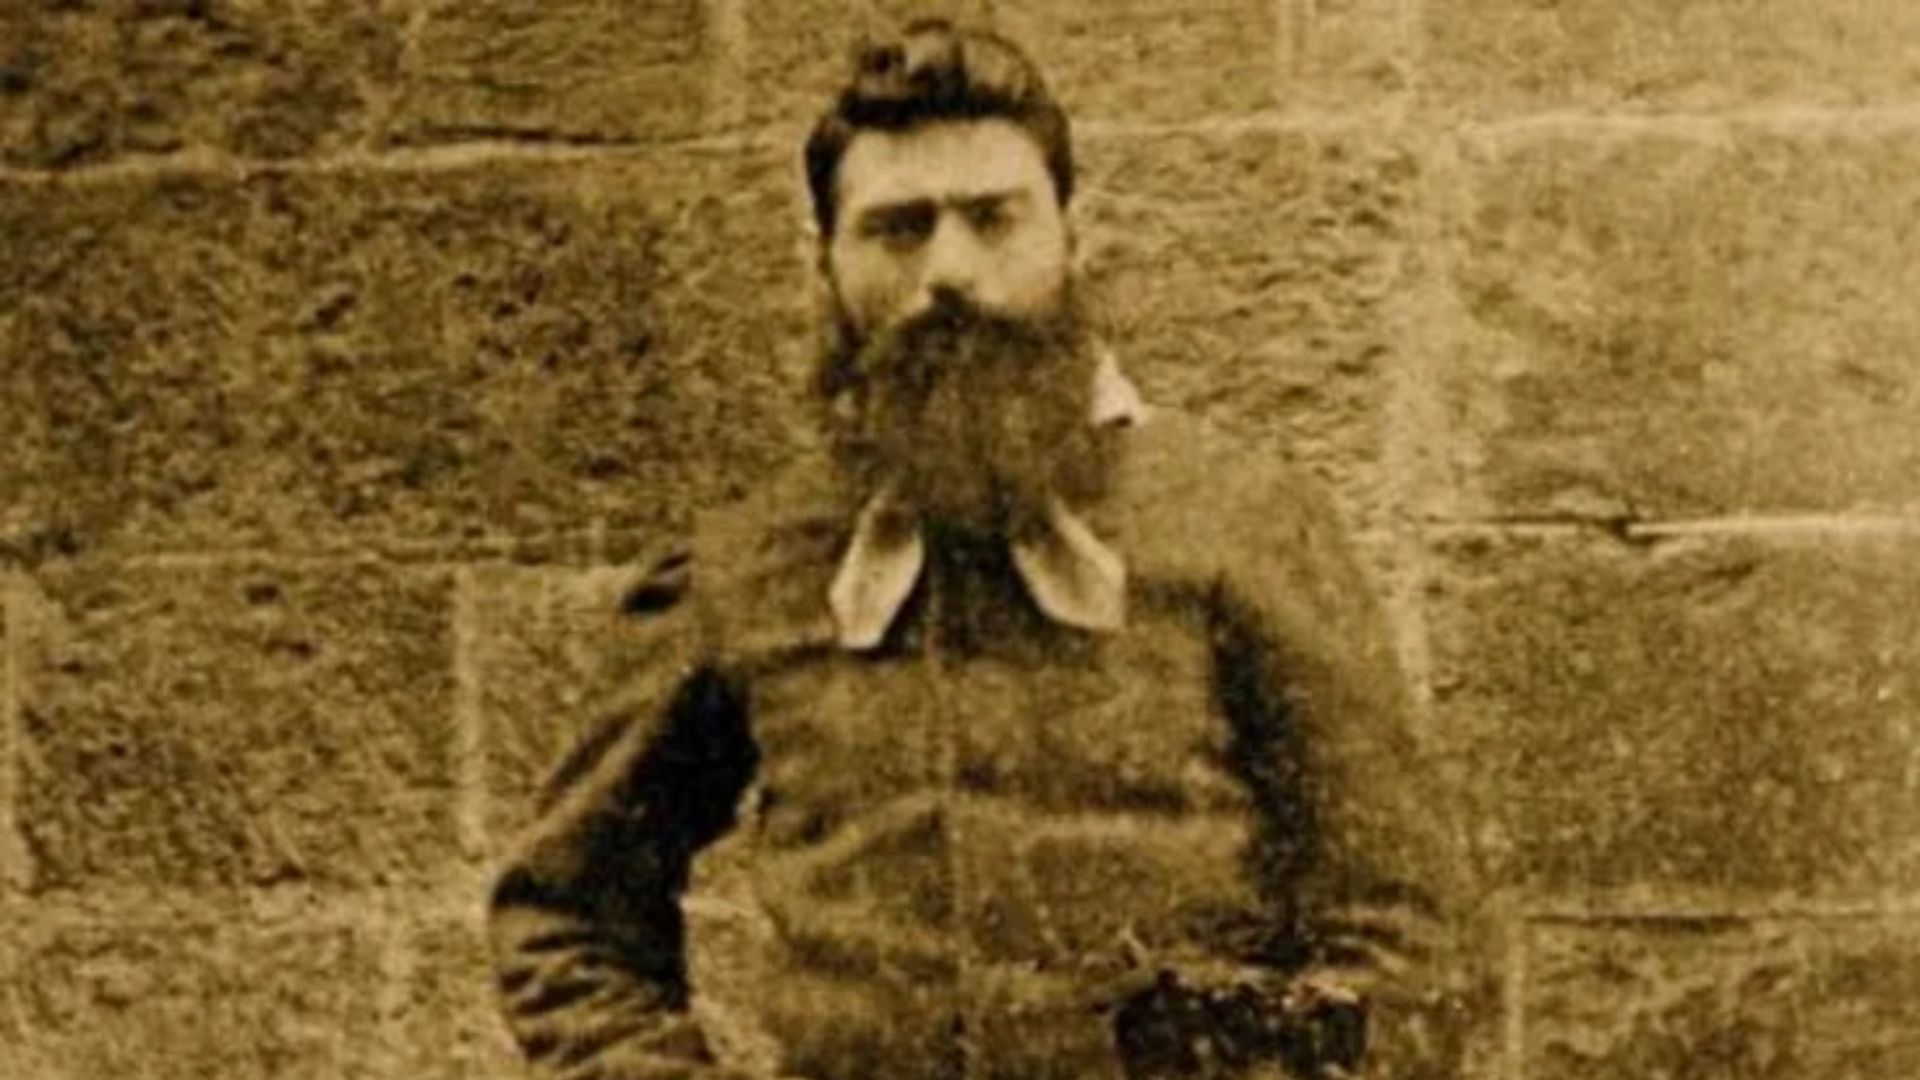 Ned Kelly Australias Infamous Outlaw Life Legacy And Controversies Explored 